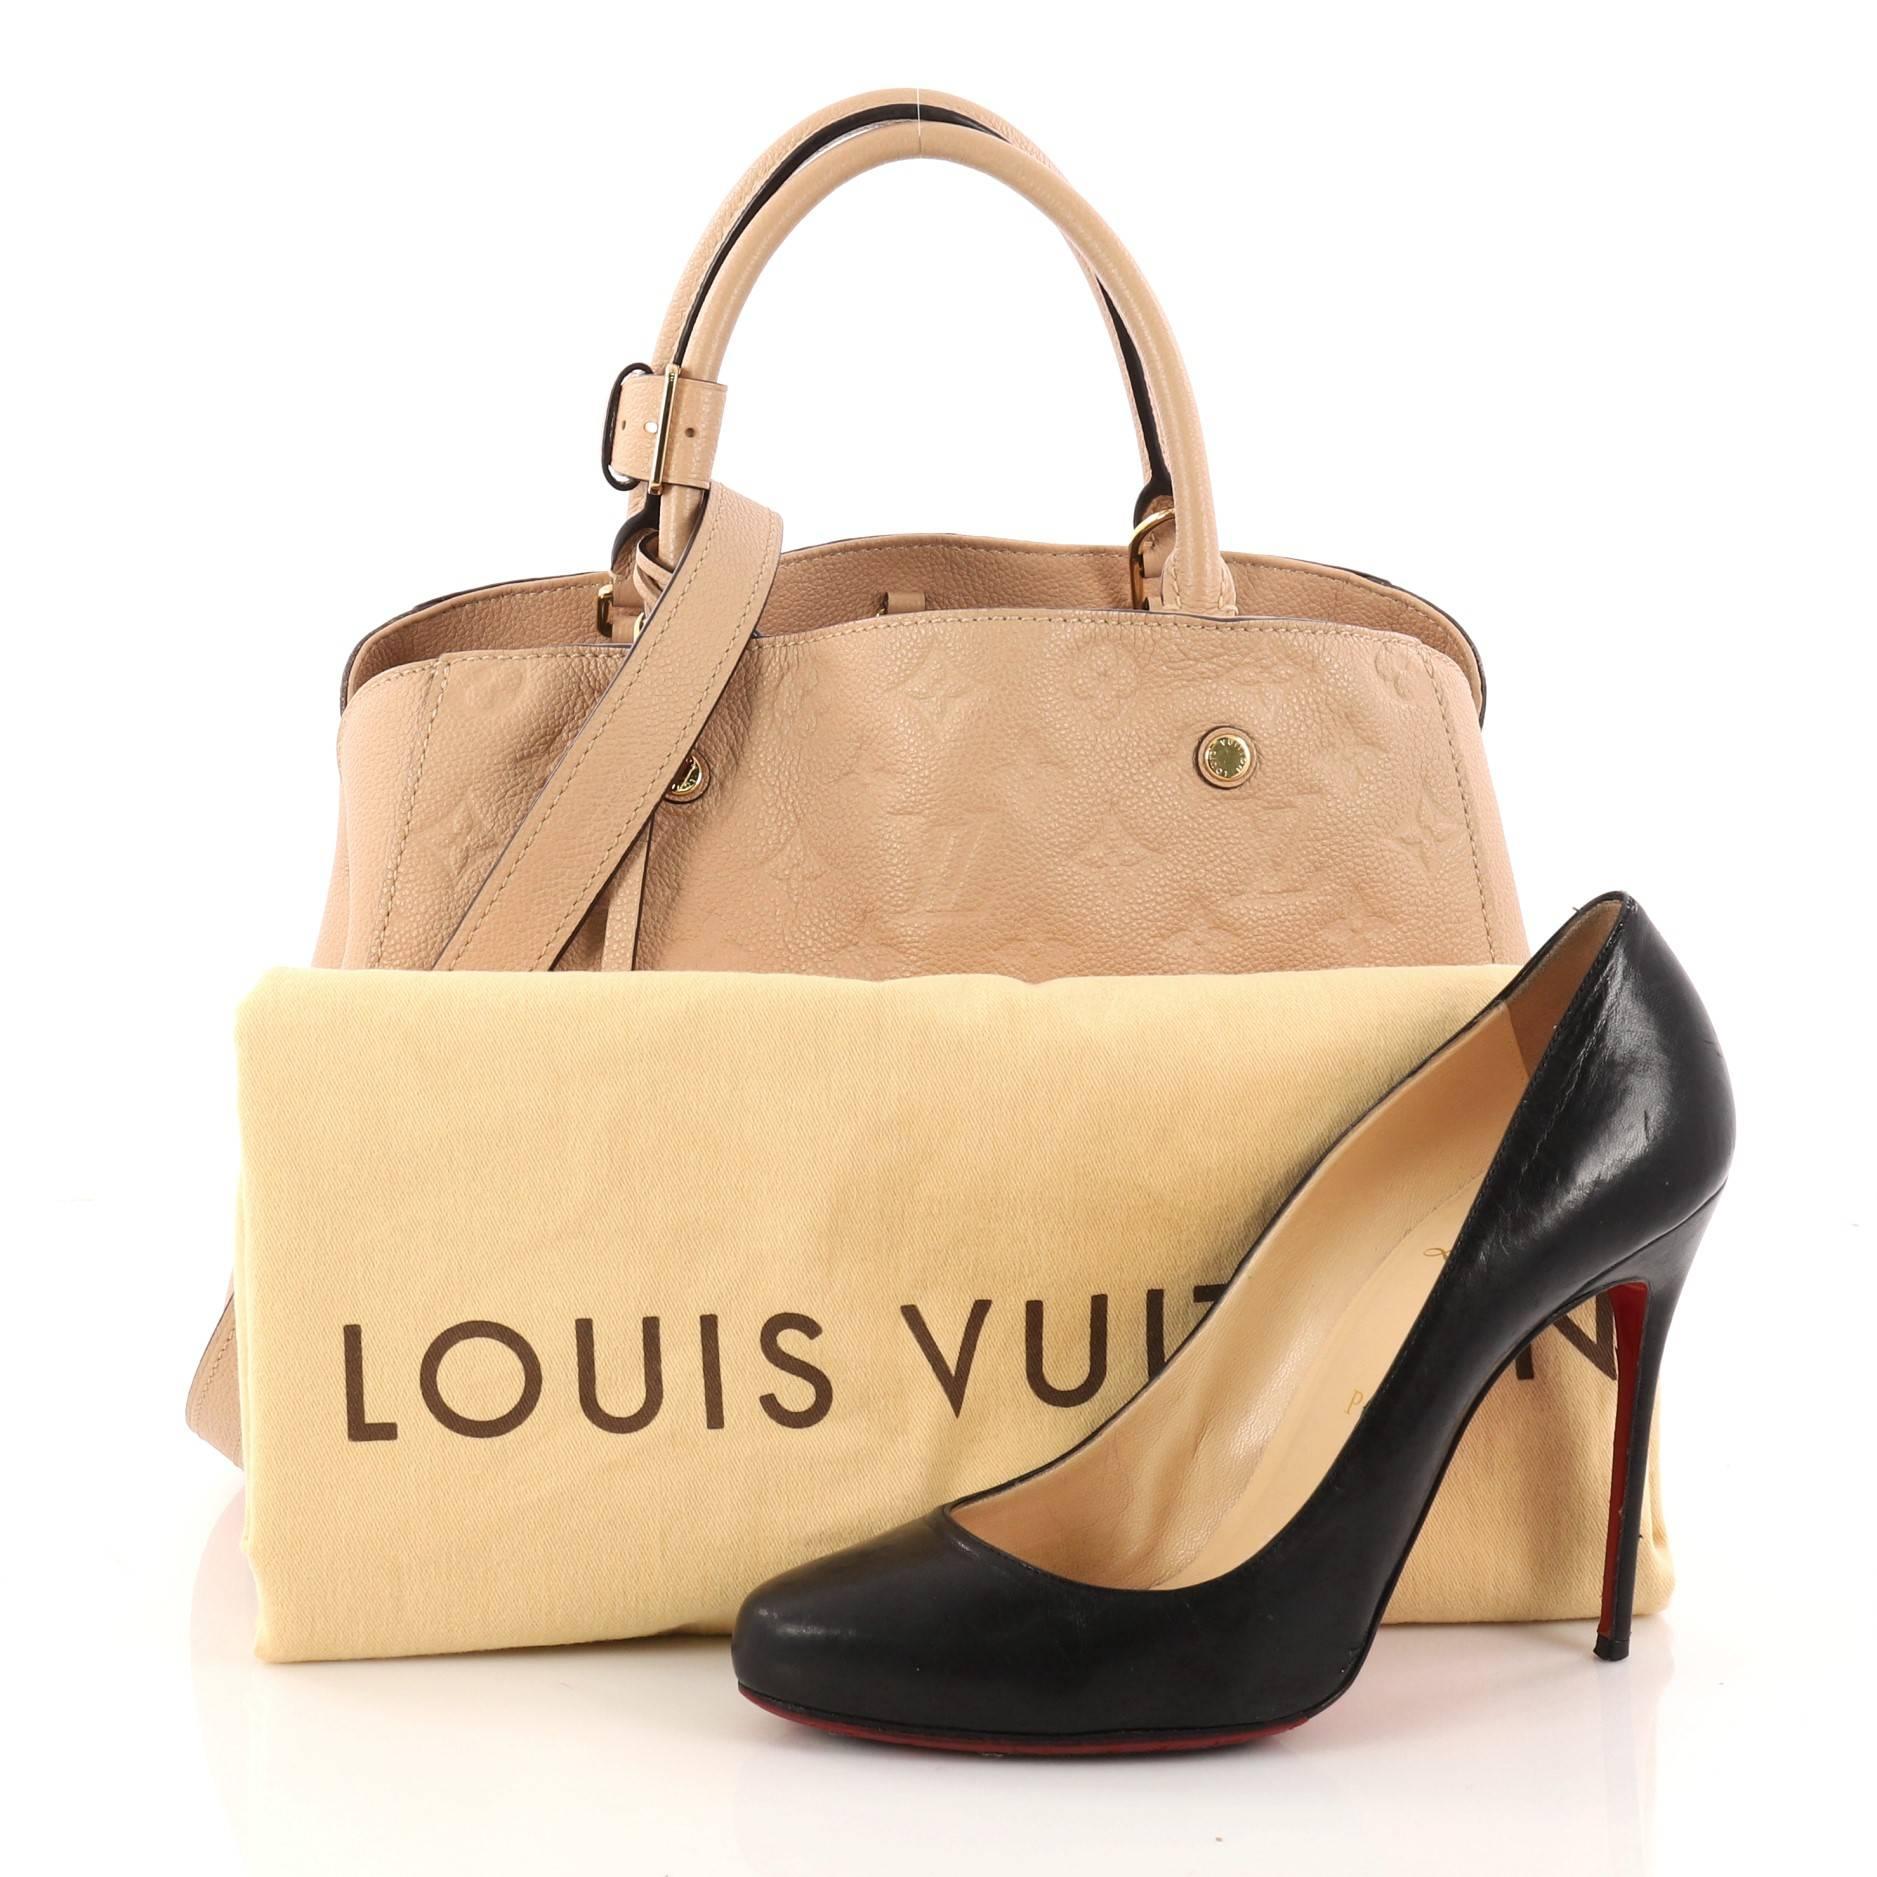 This authentic Louis Vuitton Montaigne Handbag Monogram Empreinte Leather MM named after the famed Parisian location is as sophisticated as it is sturdy. Crafted in beige embossed monogram empreinte leather, this luxurious and refined bag features